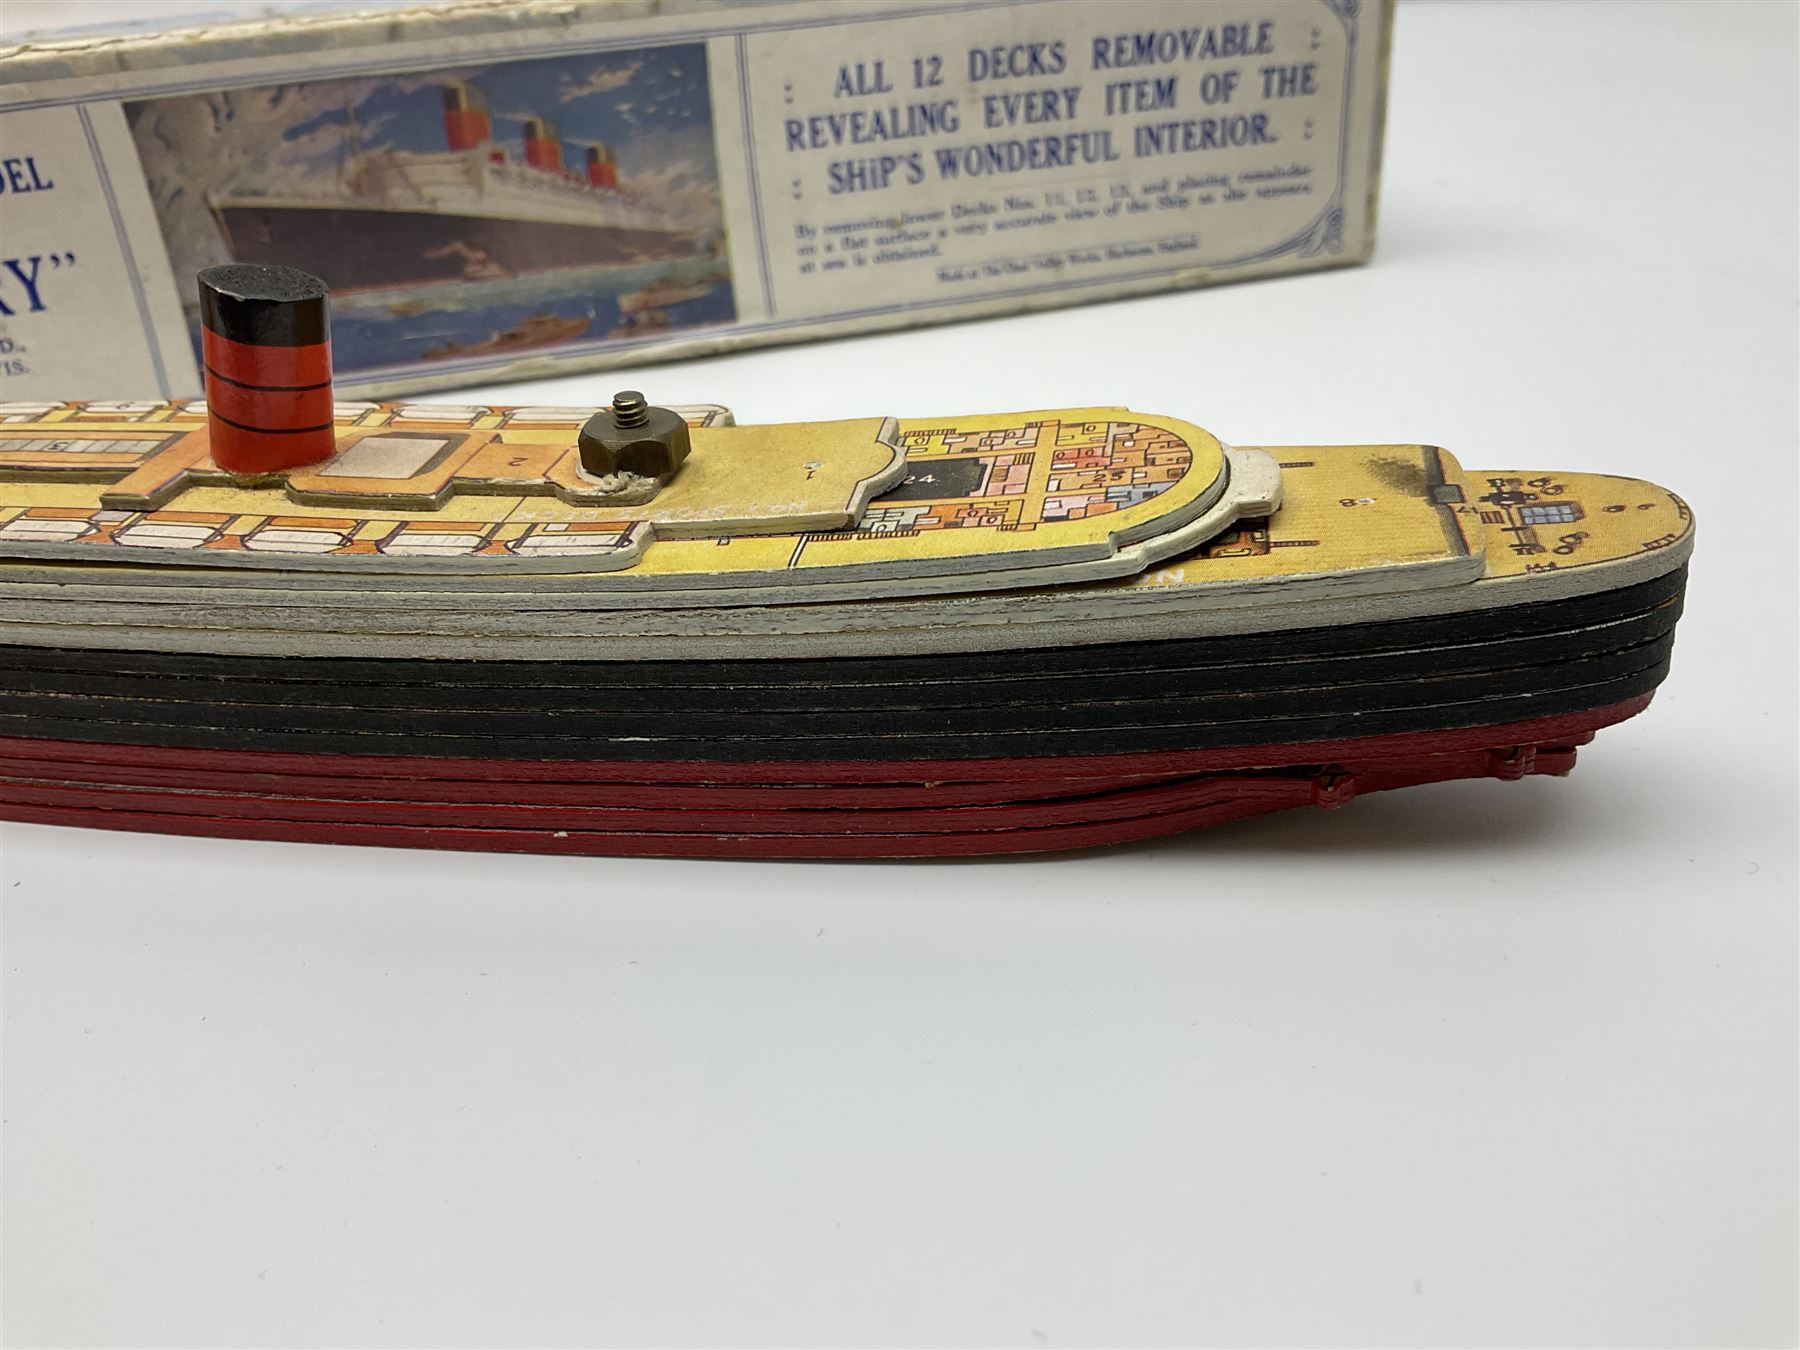 Chad Valley 'Take to Pieces' model of R.M.S. Queen Mary; made up of thirteen removable decks reveali - Image 5 of 10